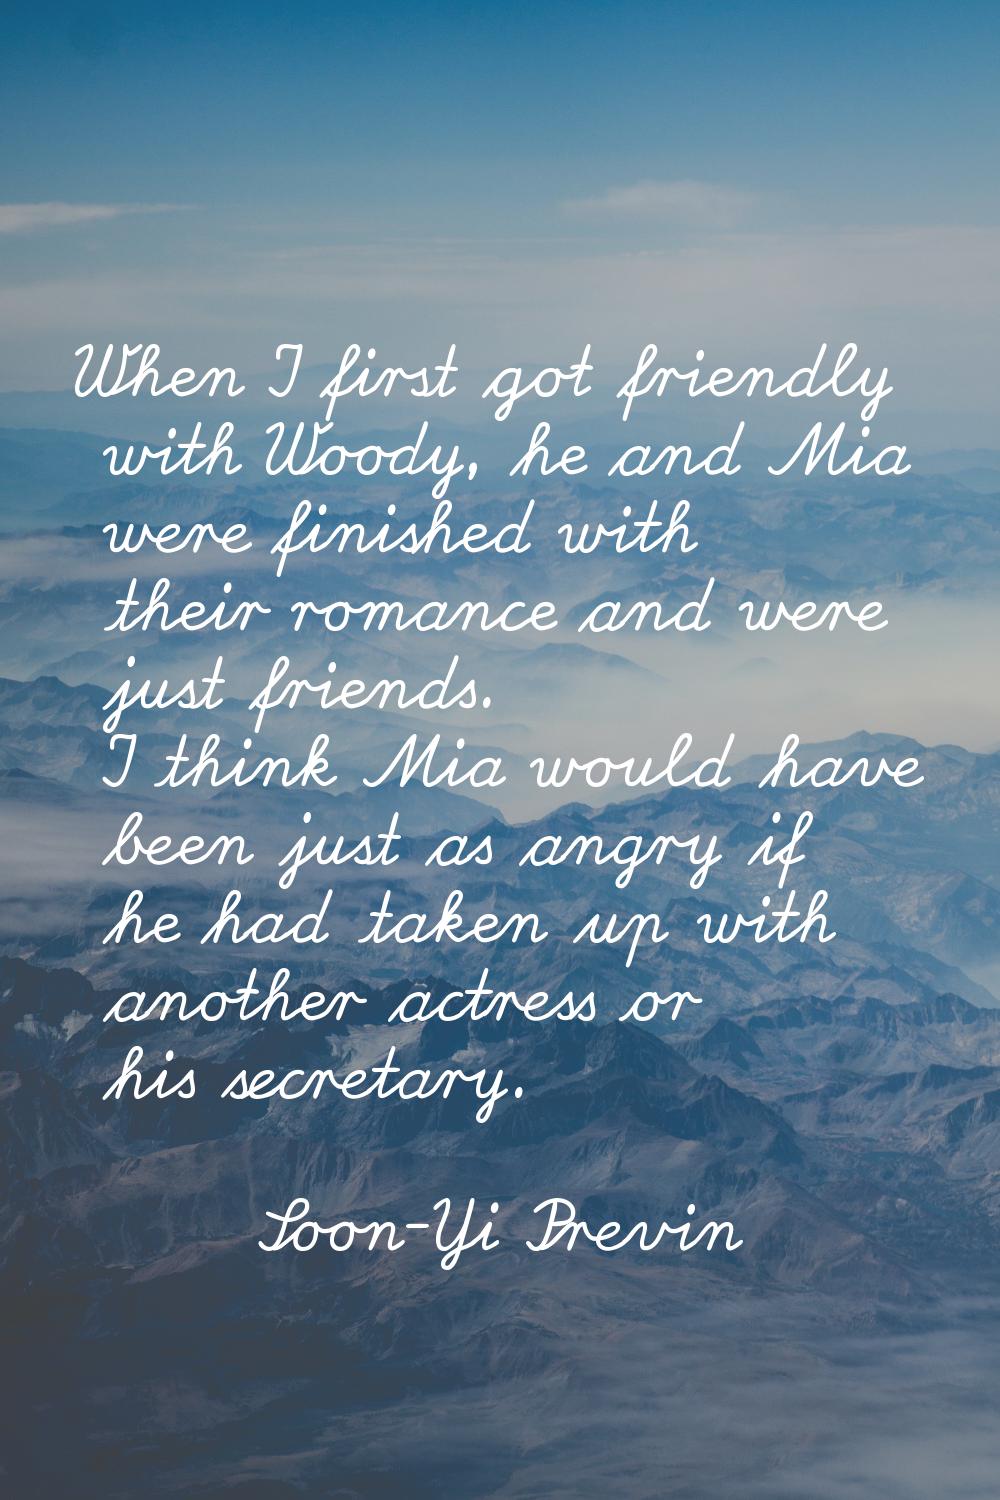 When I first got friendly with Woody, he and Mia were finished with their romance and were just fri